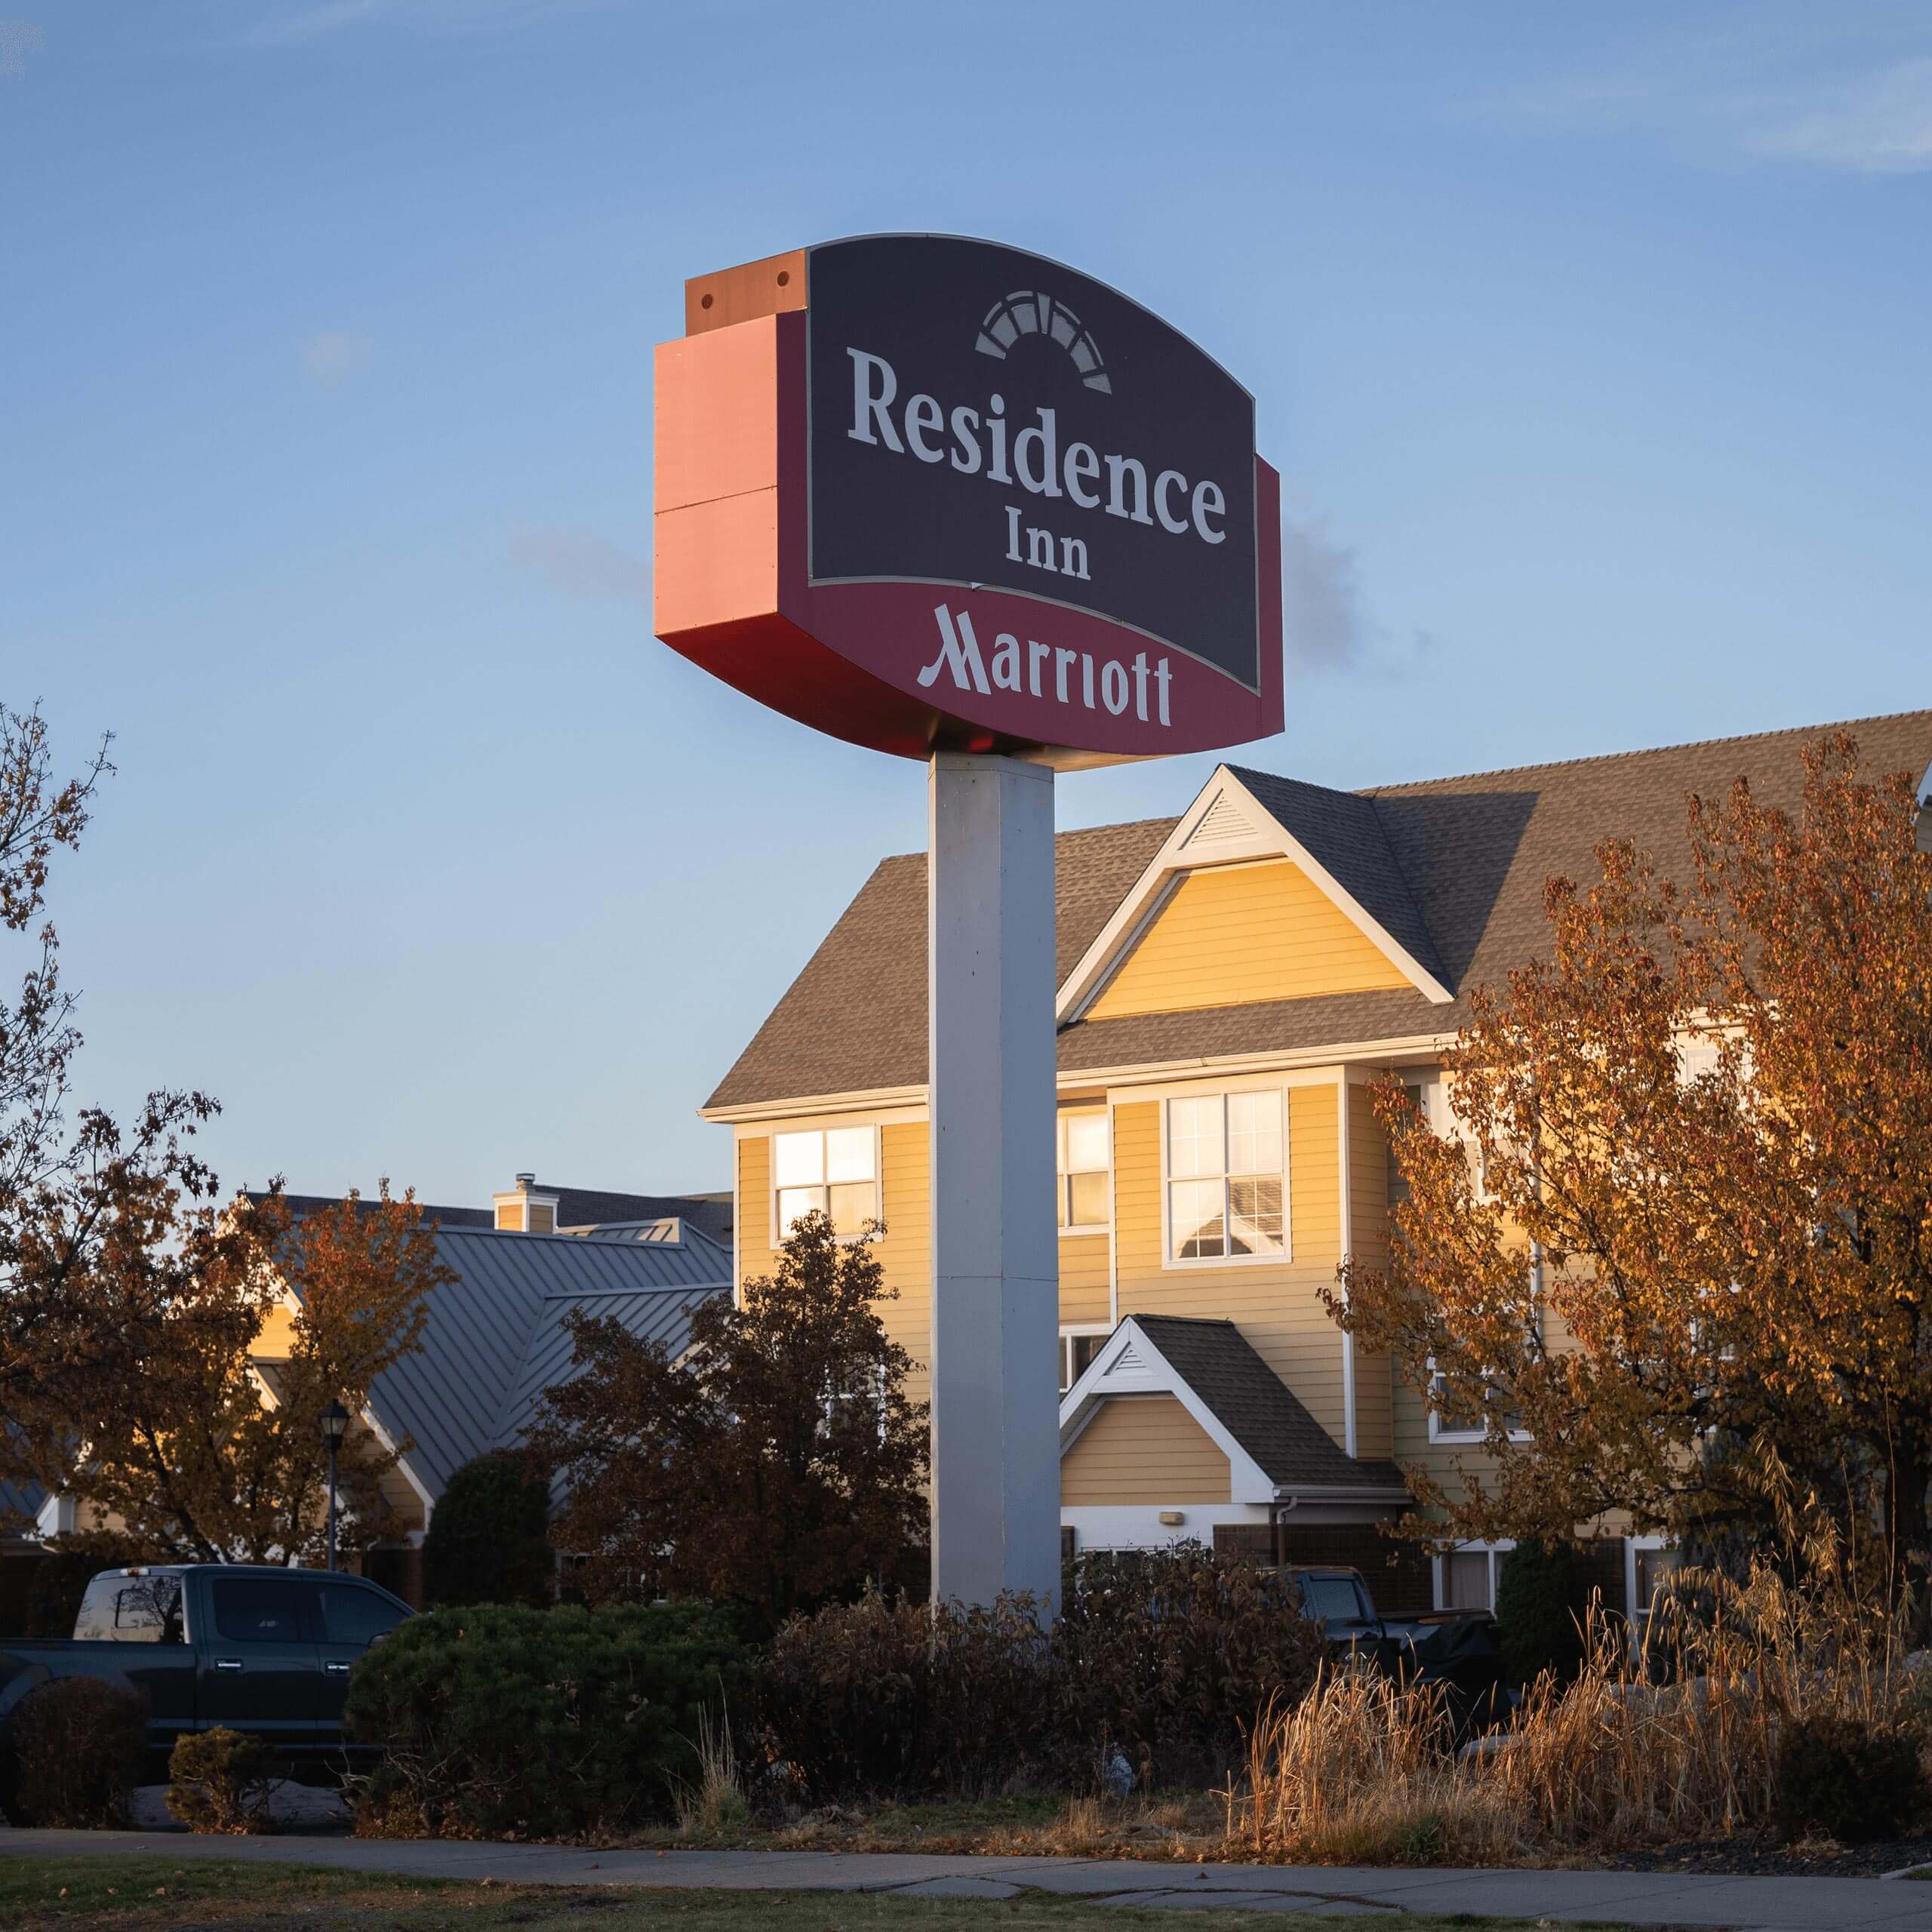 The signage of a Residence Inn hotel.